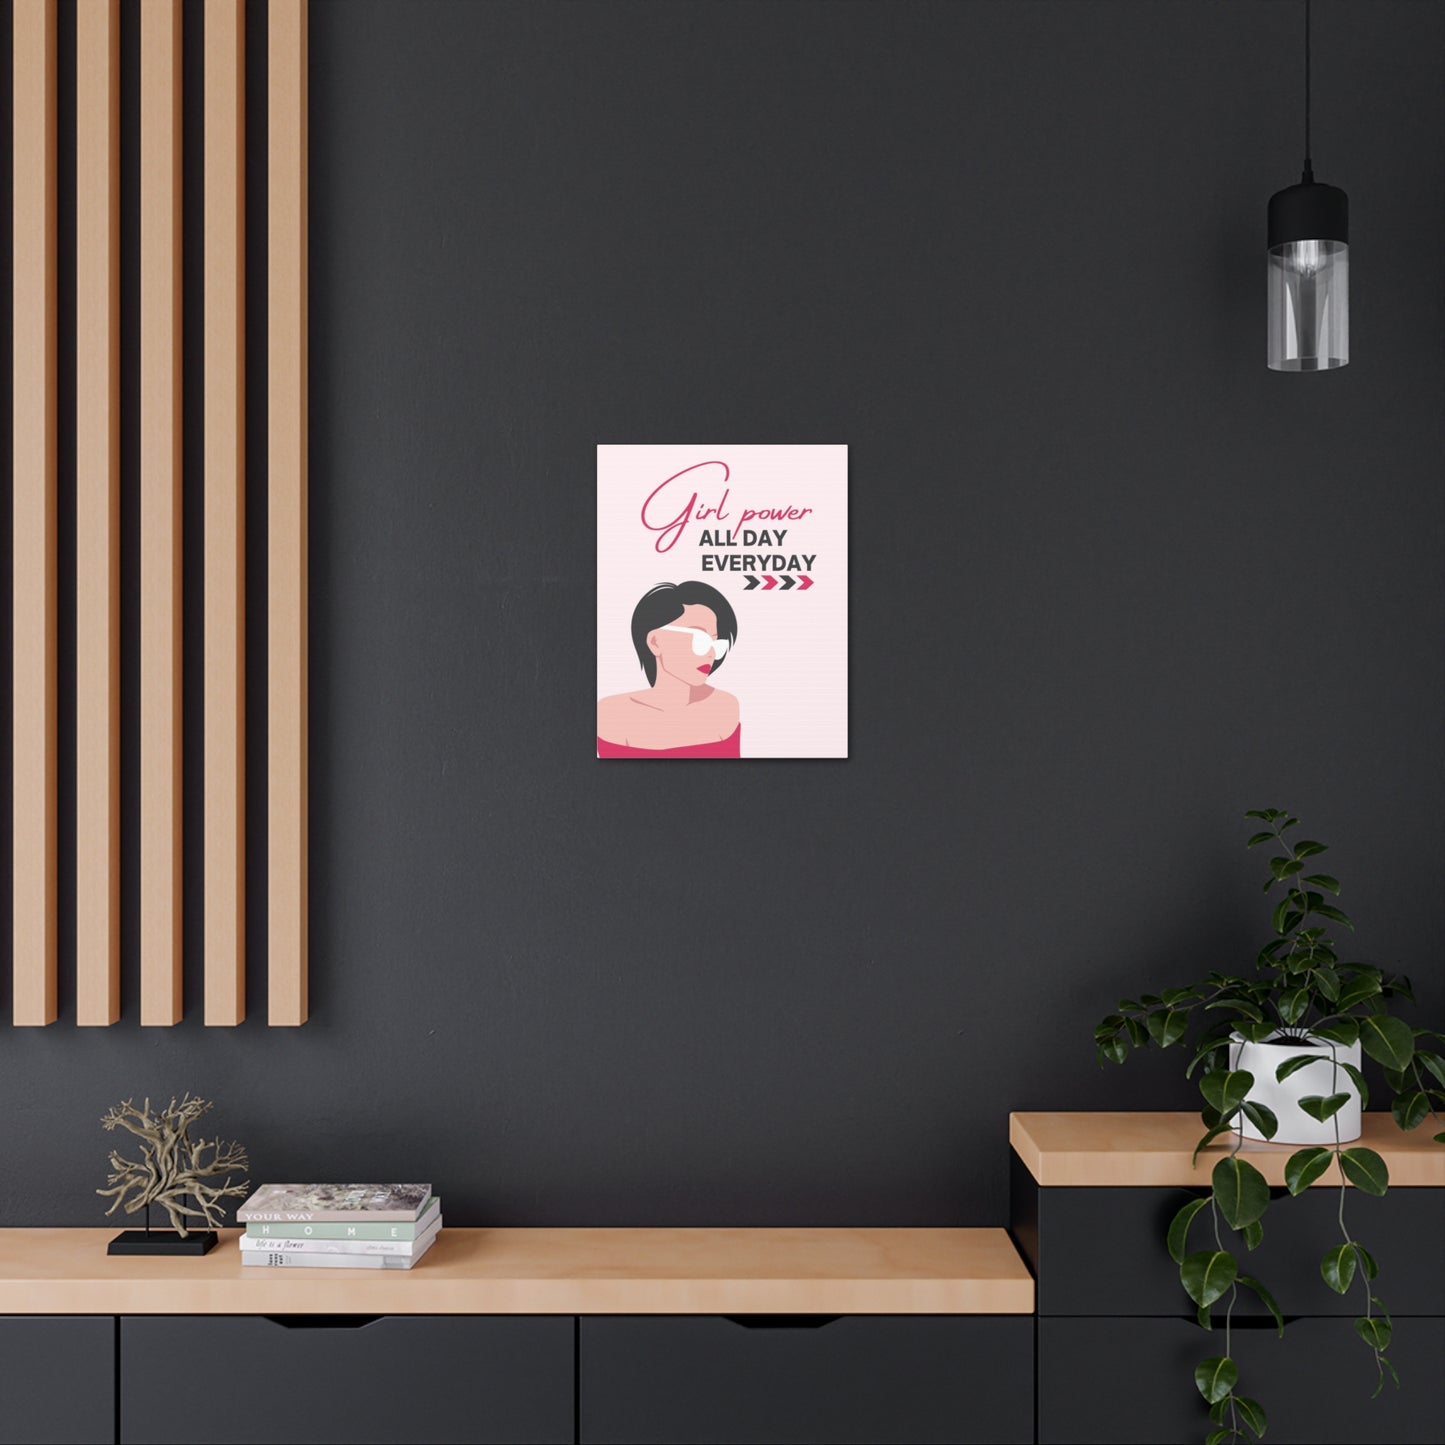 "Girl Power" Wall Art - Weave Got Gifts - Unique Gifts You Won’t Find Anywhere Else!